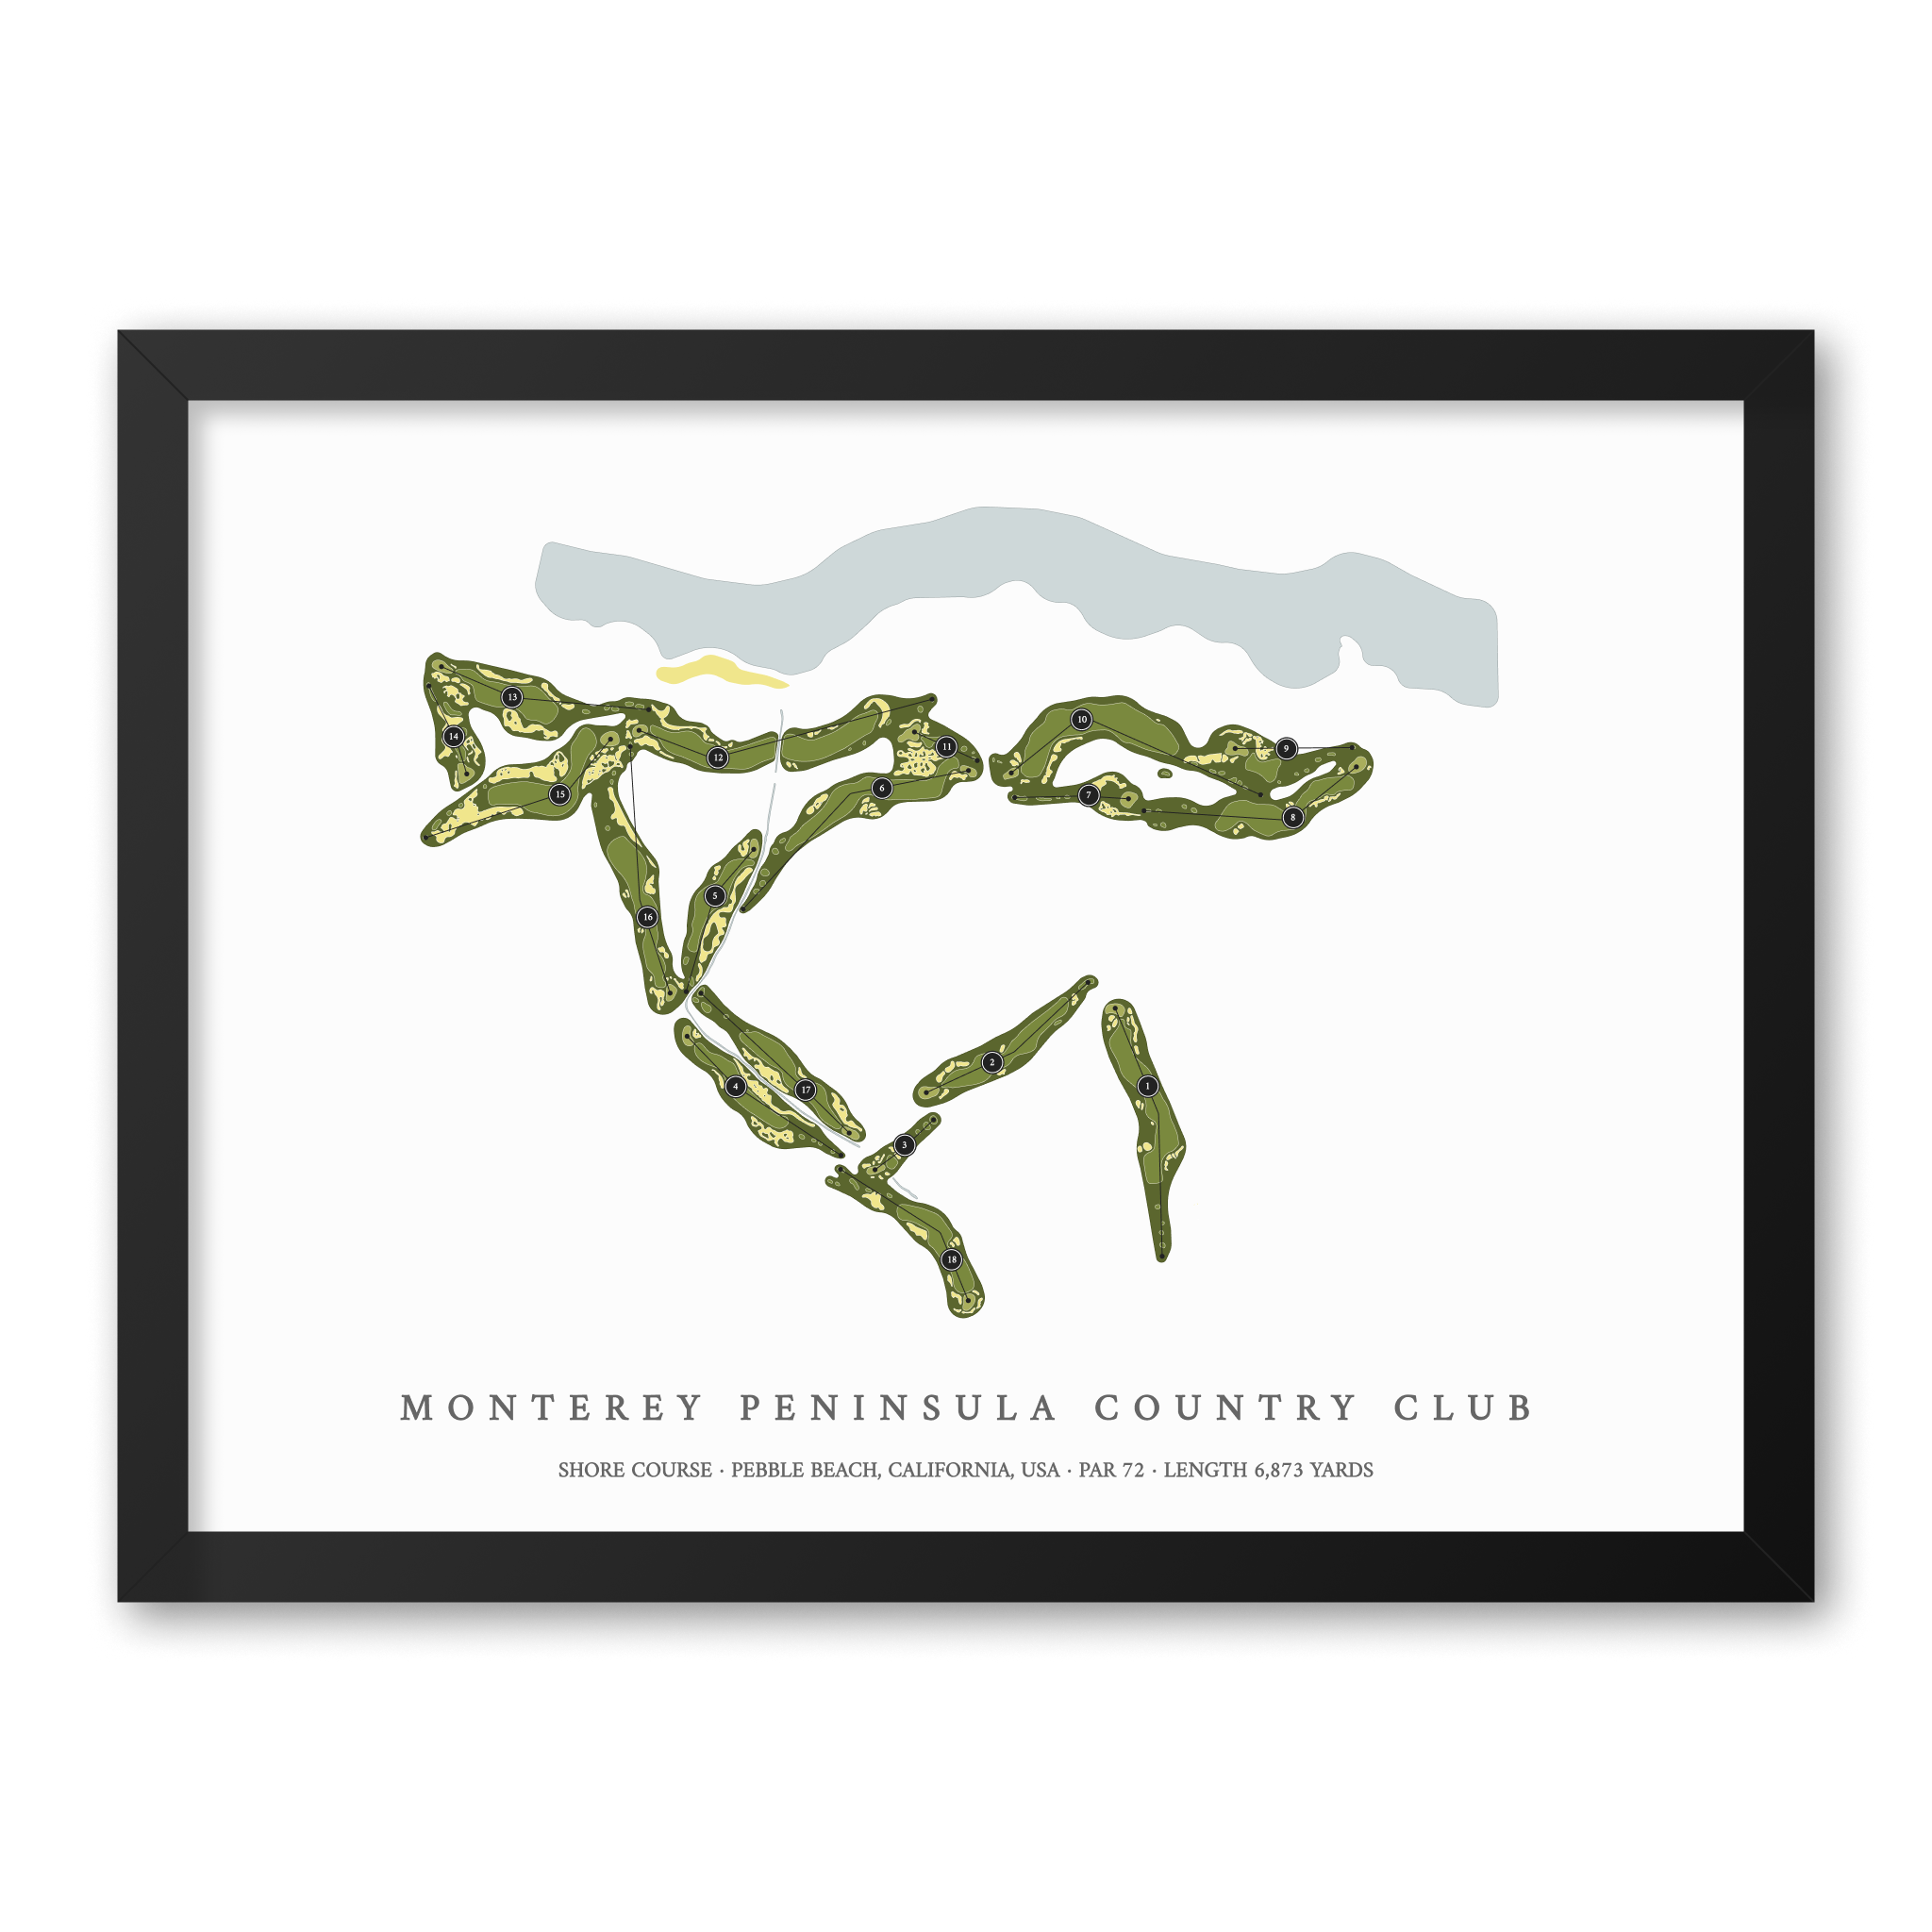 Monterey Peninsula Country Club - Shore Course | Golf Course Map | Black Frame With Hole Numbers #hole numbers_yes